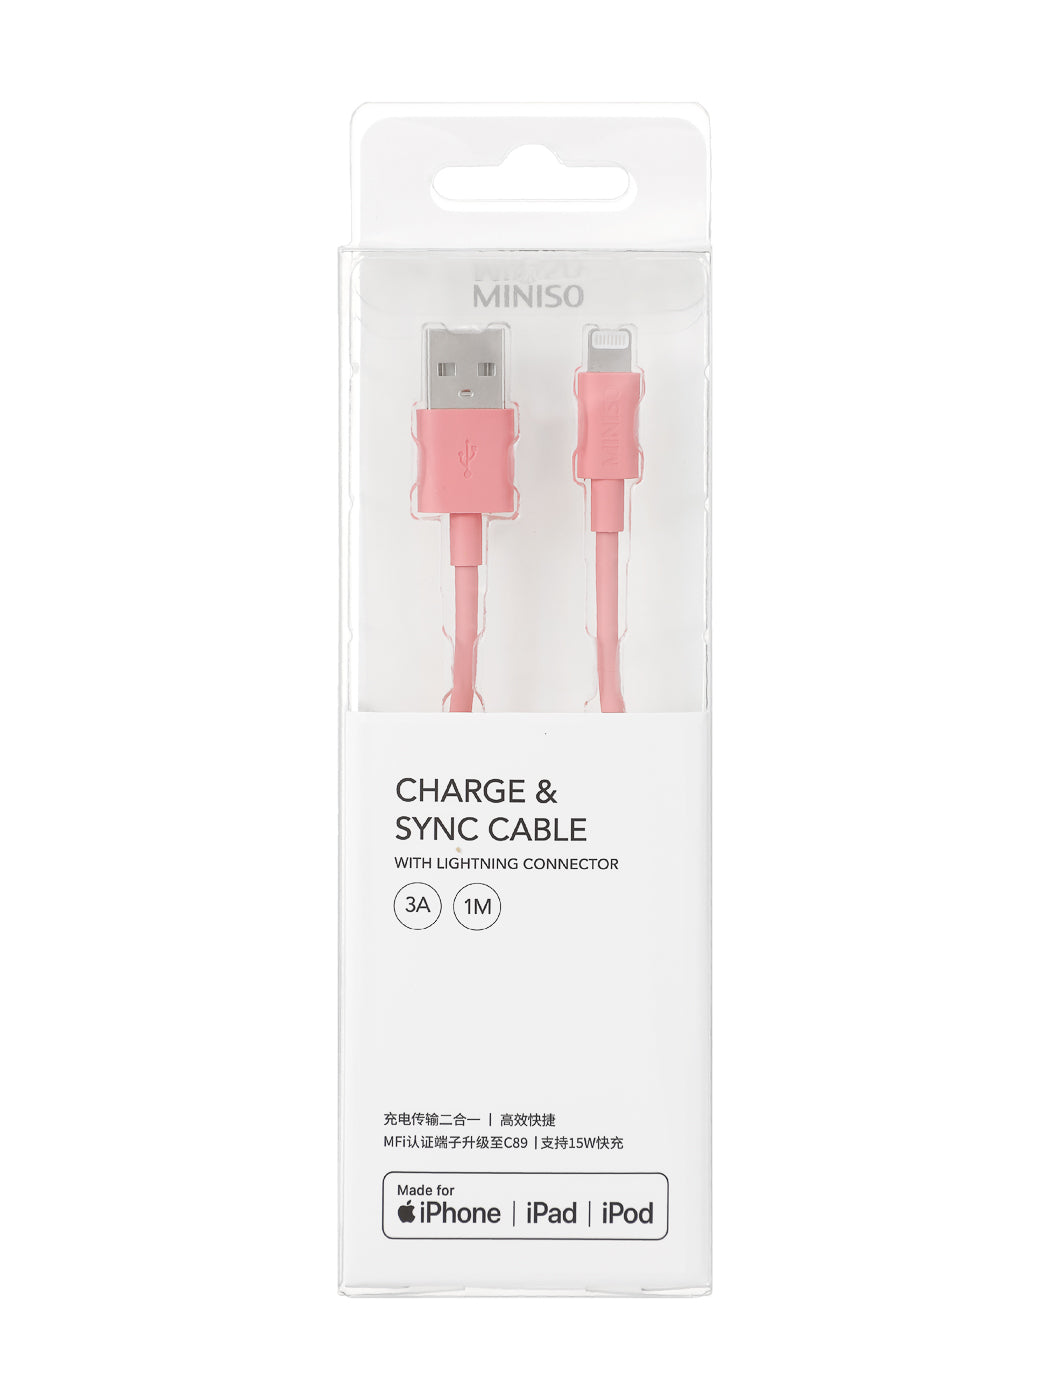 MINISO 1M FAST CHARGE CHARGE & SYNC CABLE WITH LIGHTNING CONNECTOR (PINK) 2010251514100 CHARGING CABLE WITH LIGHTNING CONNECTOR-2